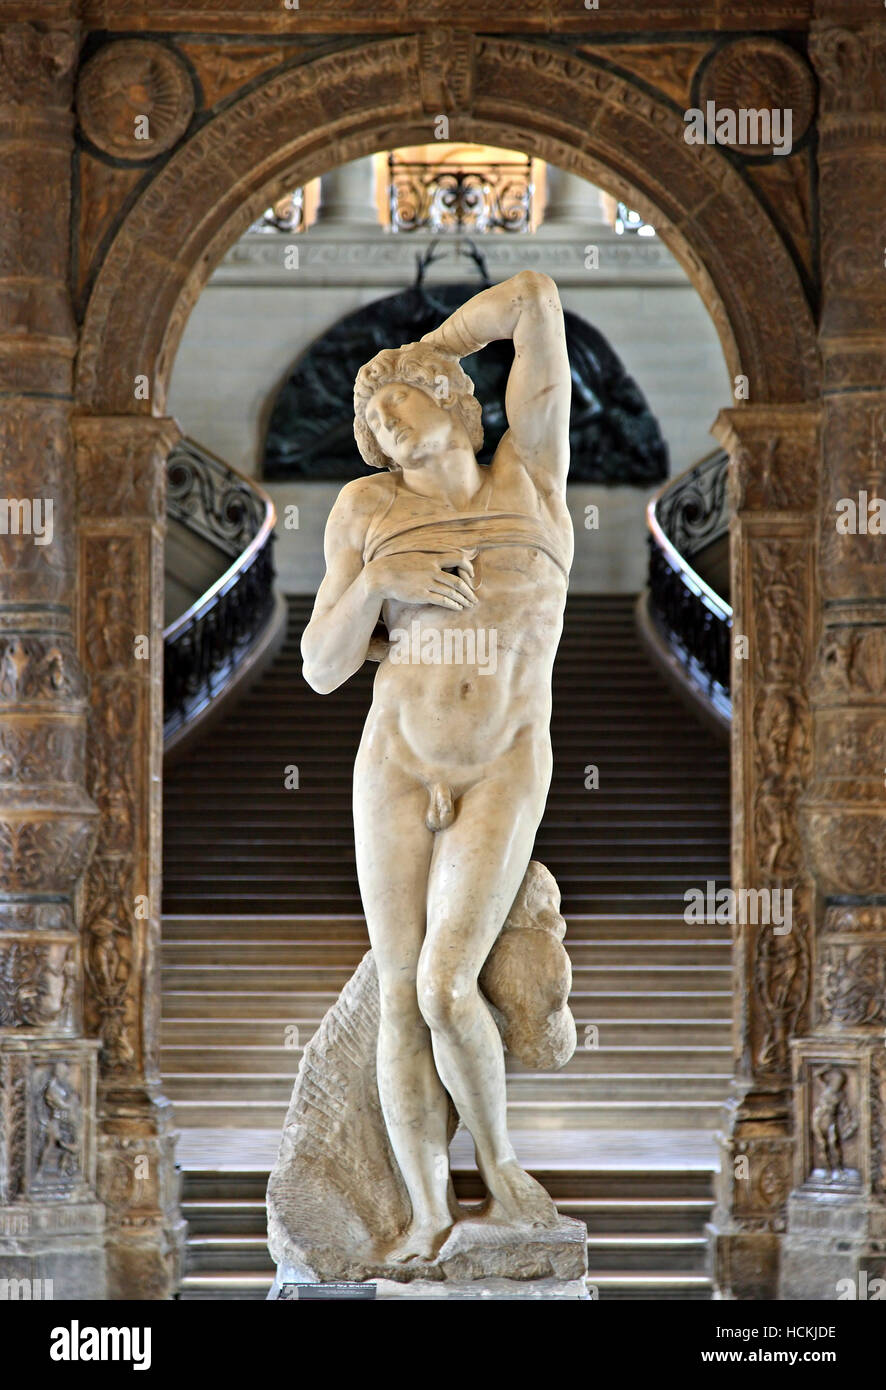 'The Dying Slave' by Michelangelo, a masterpiece of the Italian Renaissance, in Denon Wing, Louvre Museum, Paris, France. Stock Photo